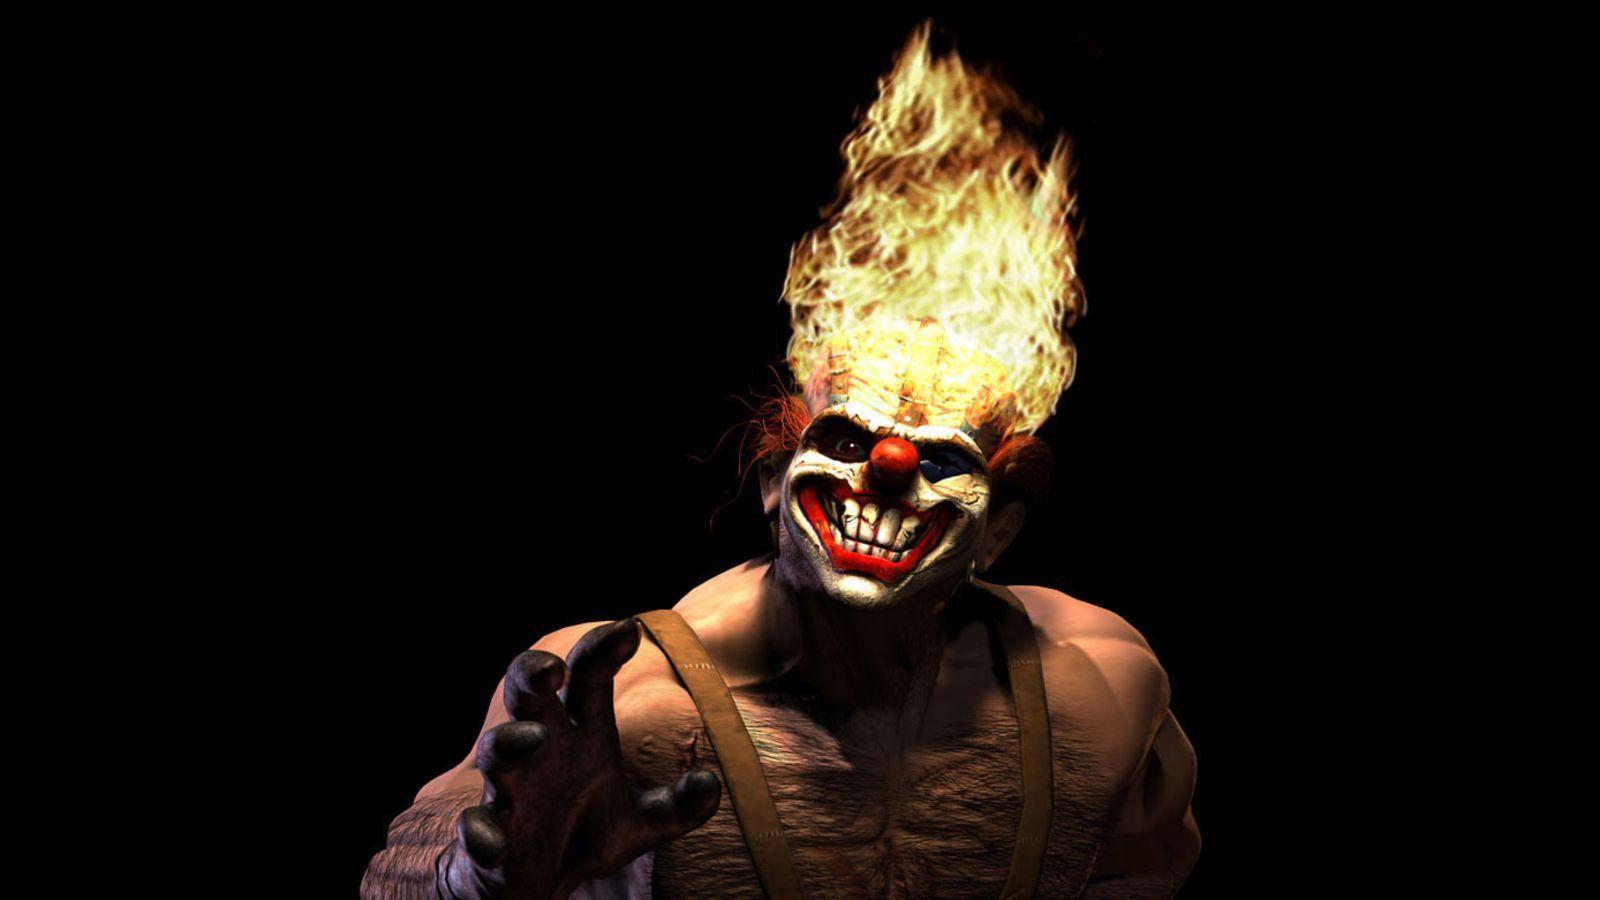 Twisted Metal PS5 (TWISTED METAL V) - Need this to Happen (FAN MADE) : r/ TwistedMetal